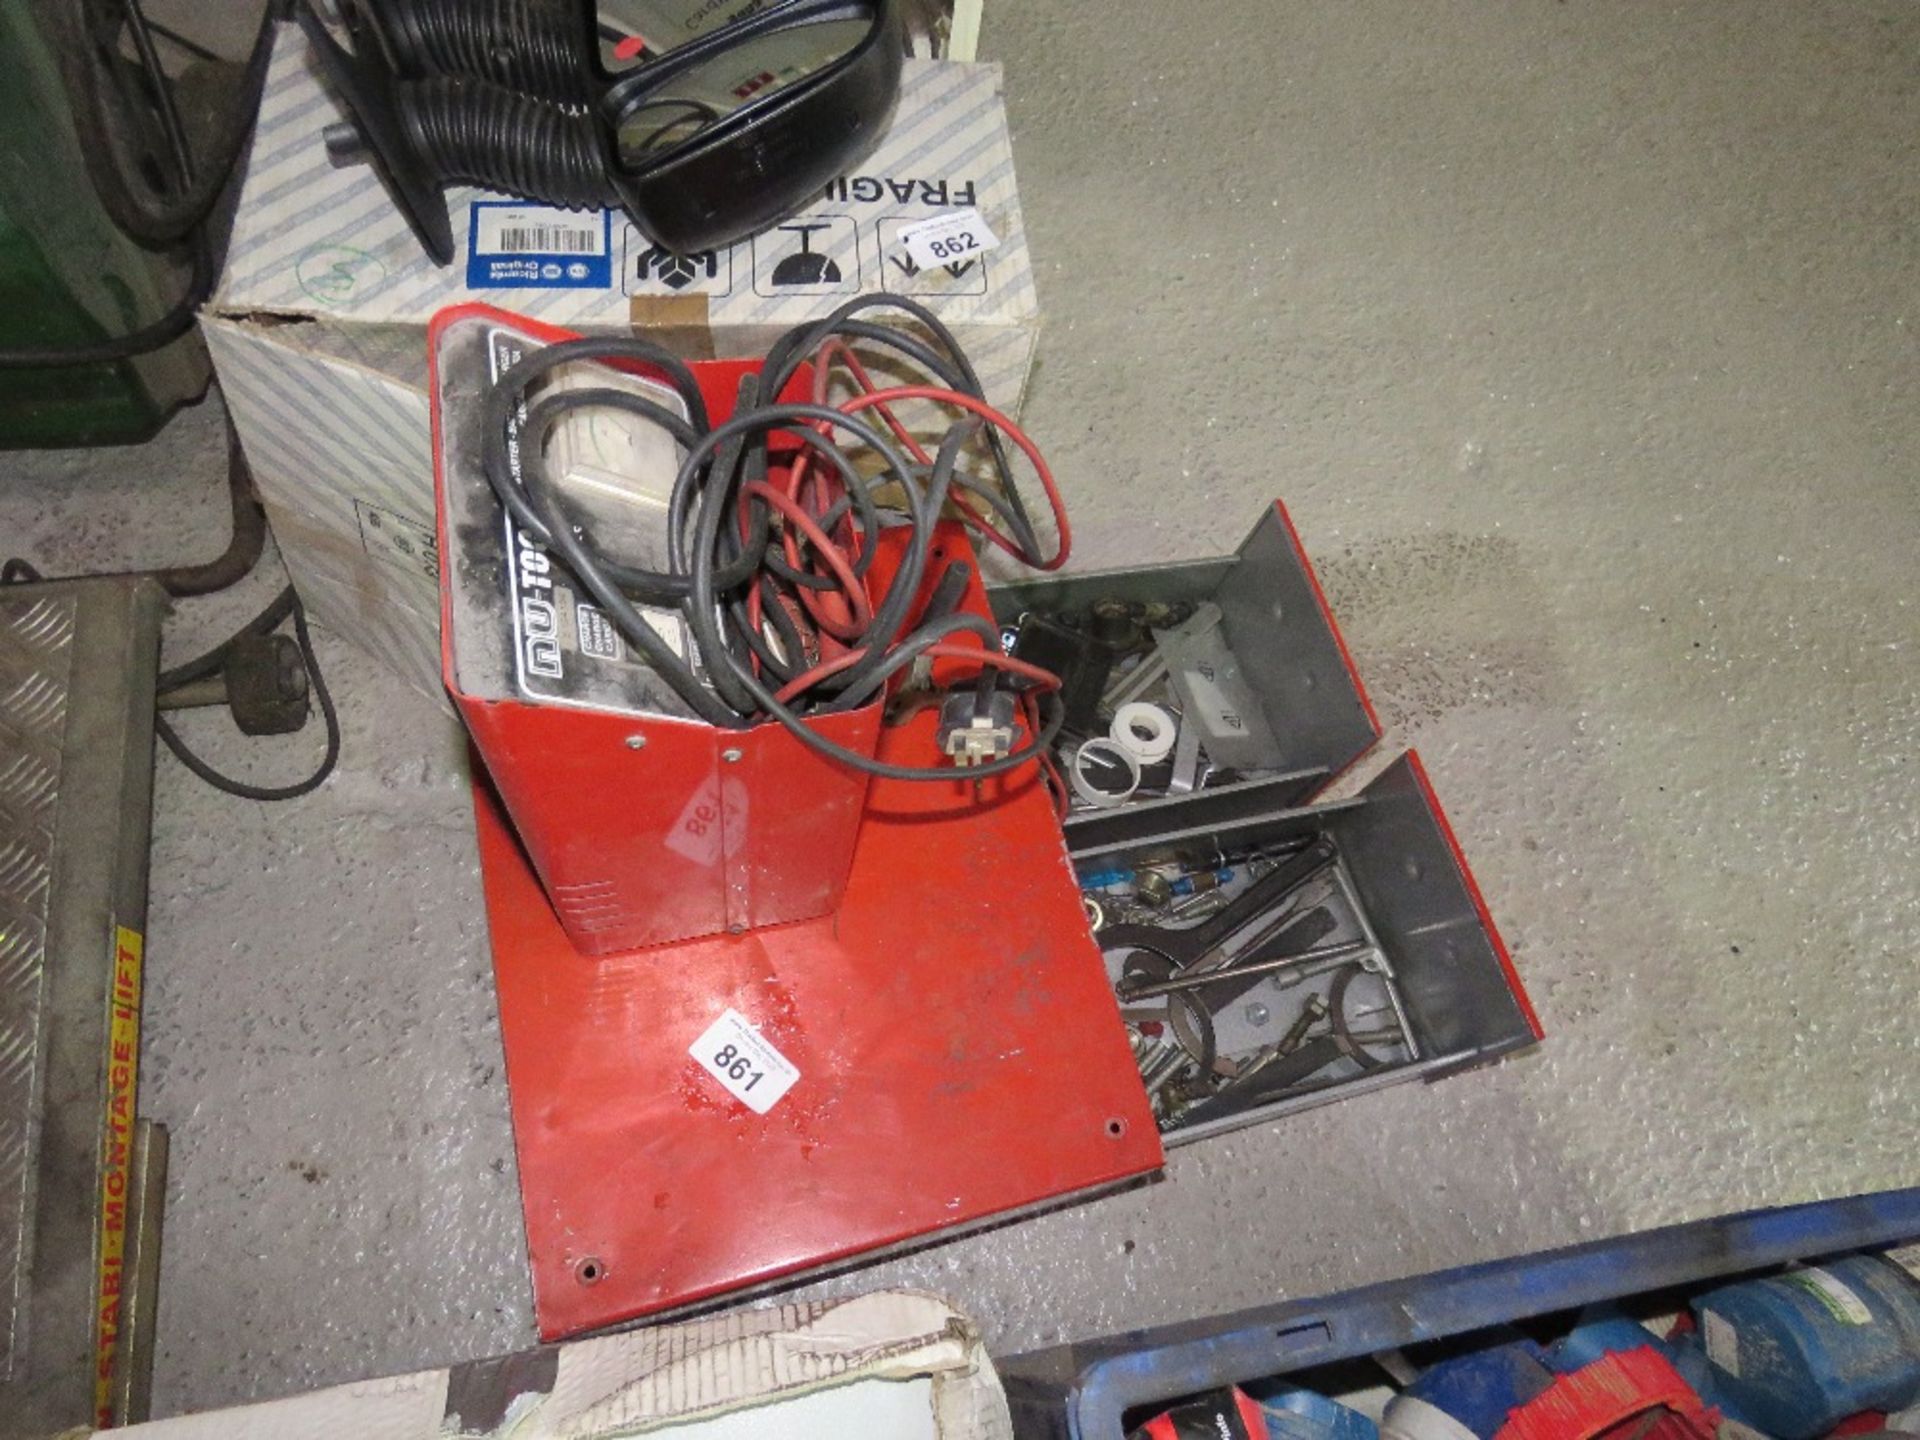 CHARGER UNIT PLUS A RED TOOL CHEST WITH CONTENTS. THIS LOT IS SOLD UNDER THE AUCTIONEERS MARGIN SCHE